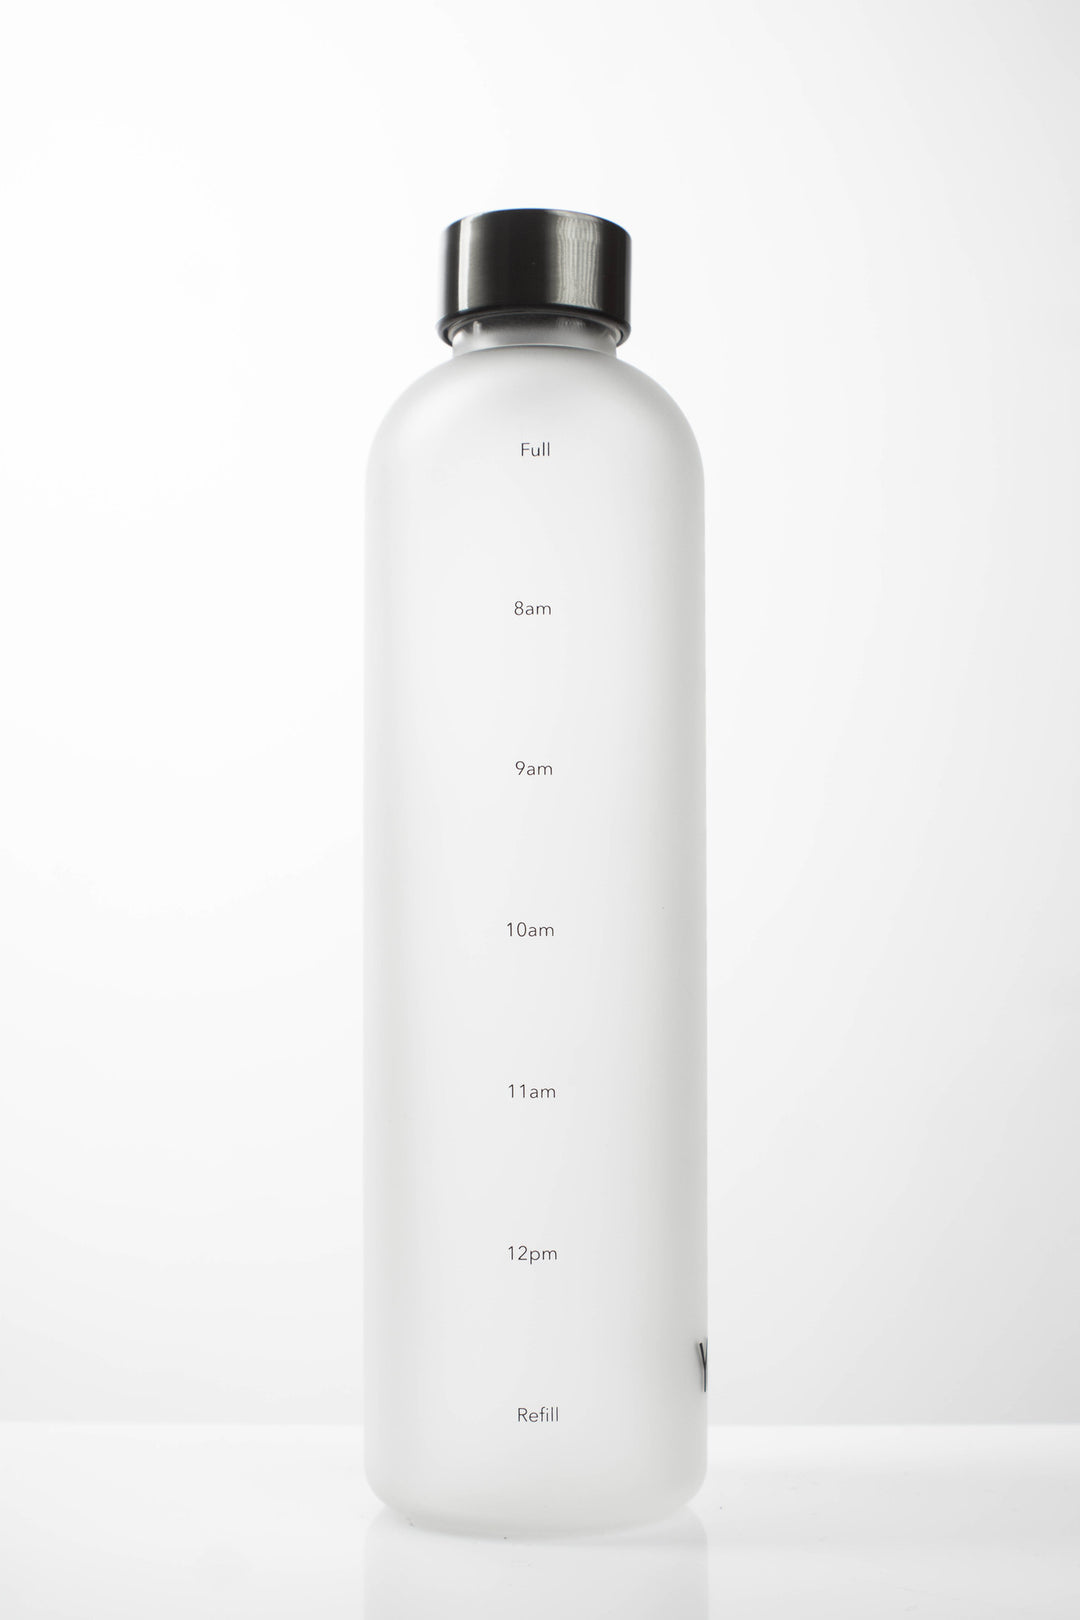 The Reusable Water Bottle